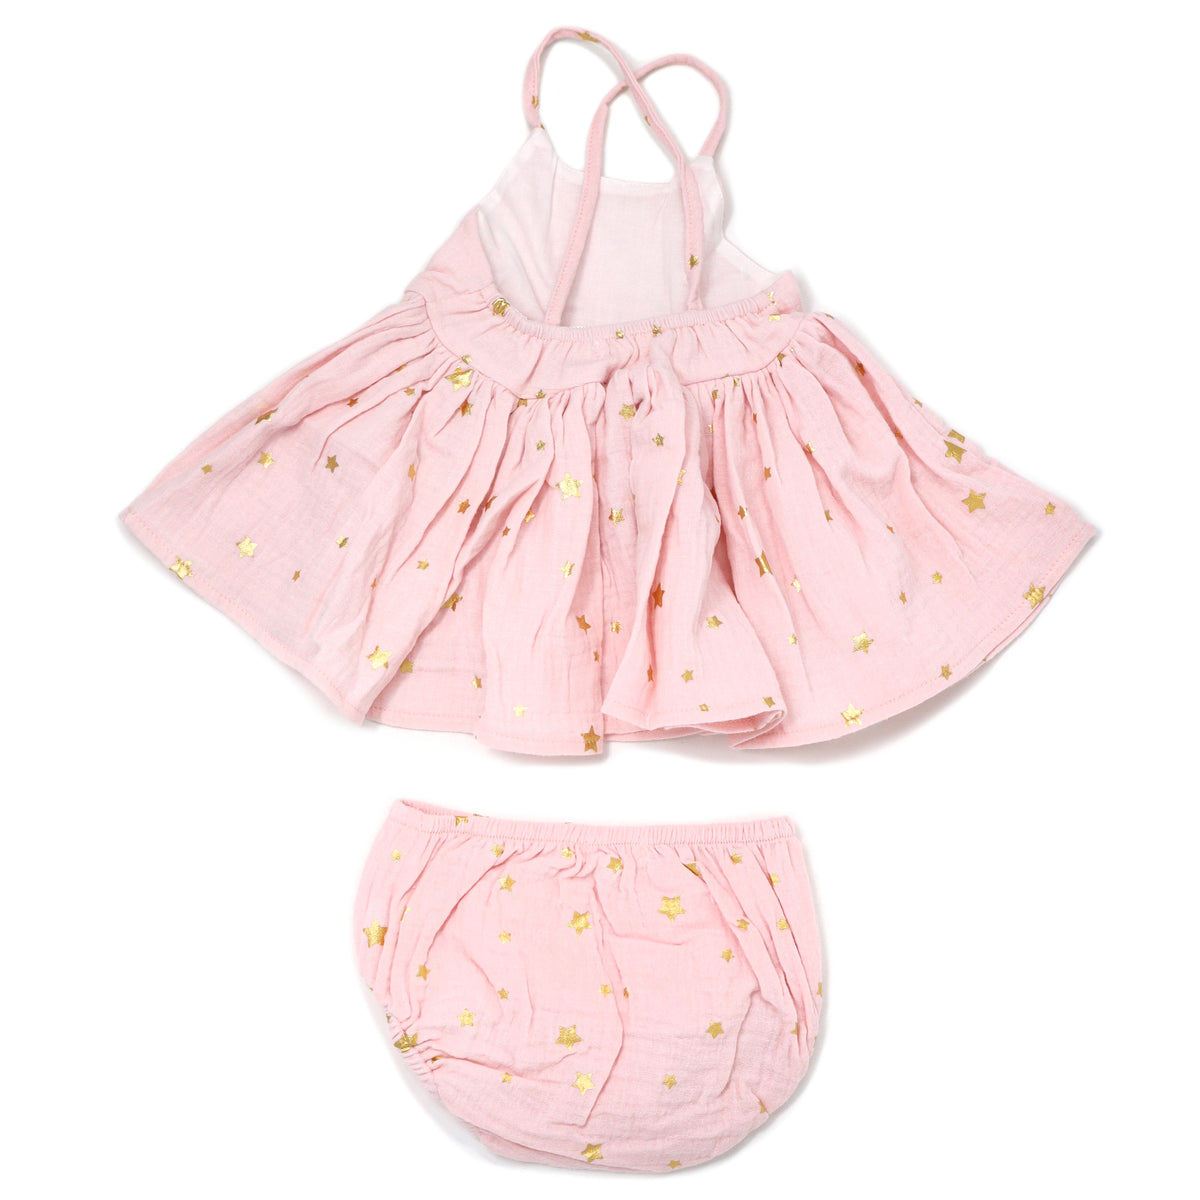 oh baby! Gauze Party Dress - Mini Gold Stars - Pale Pink